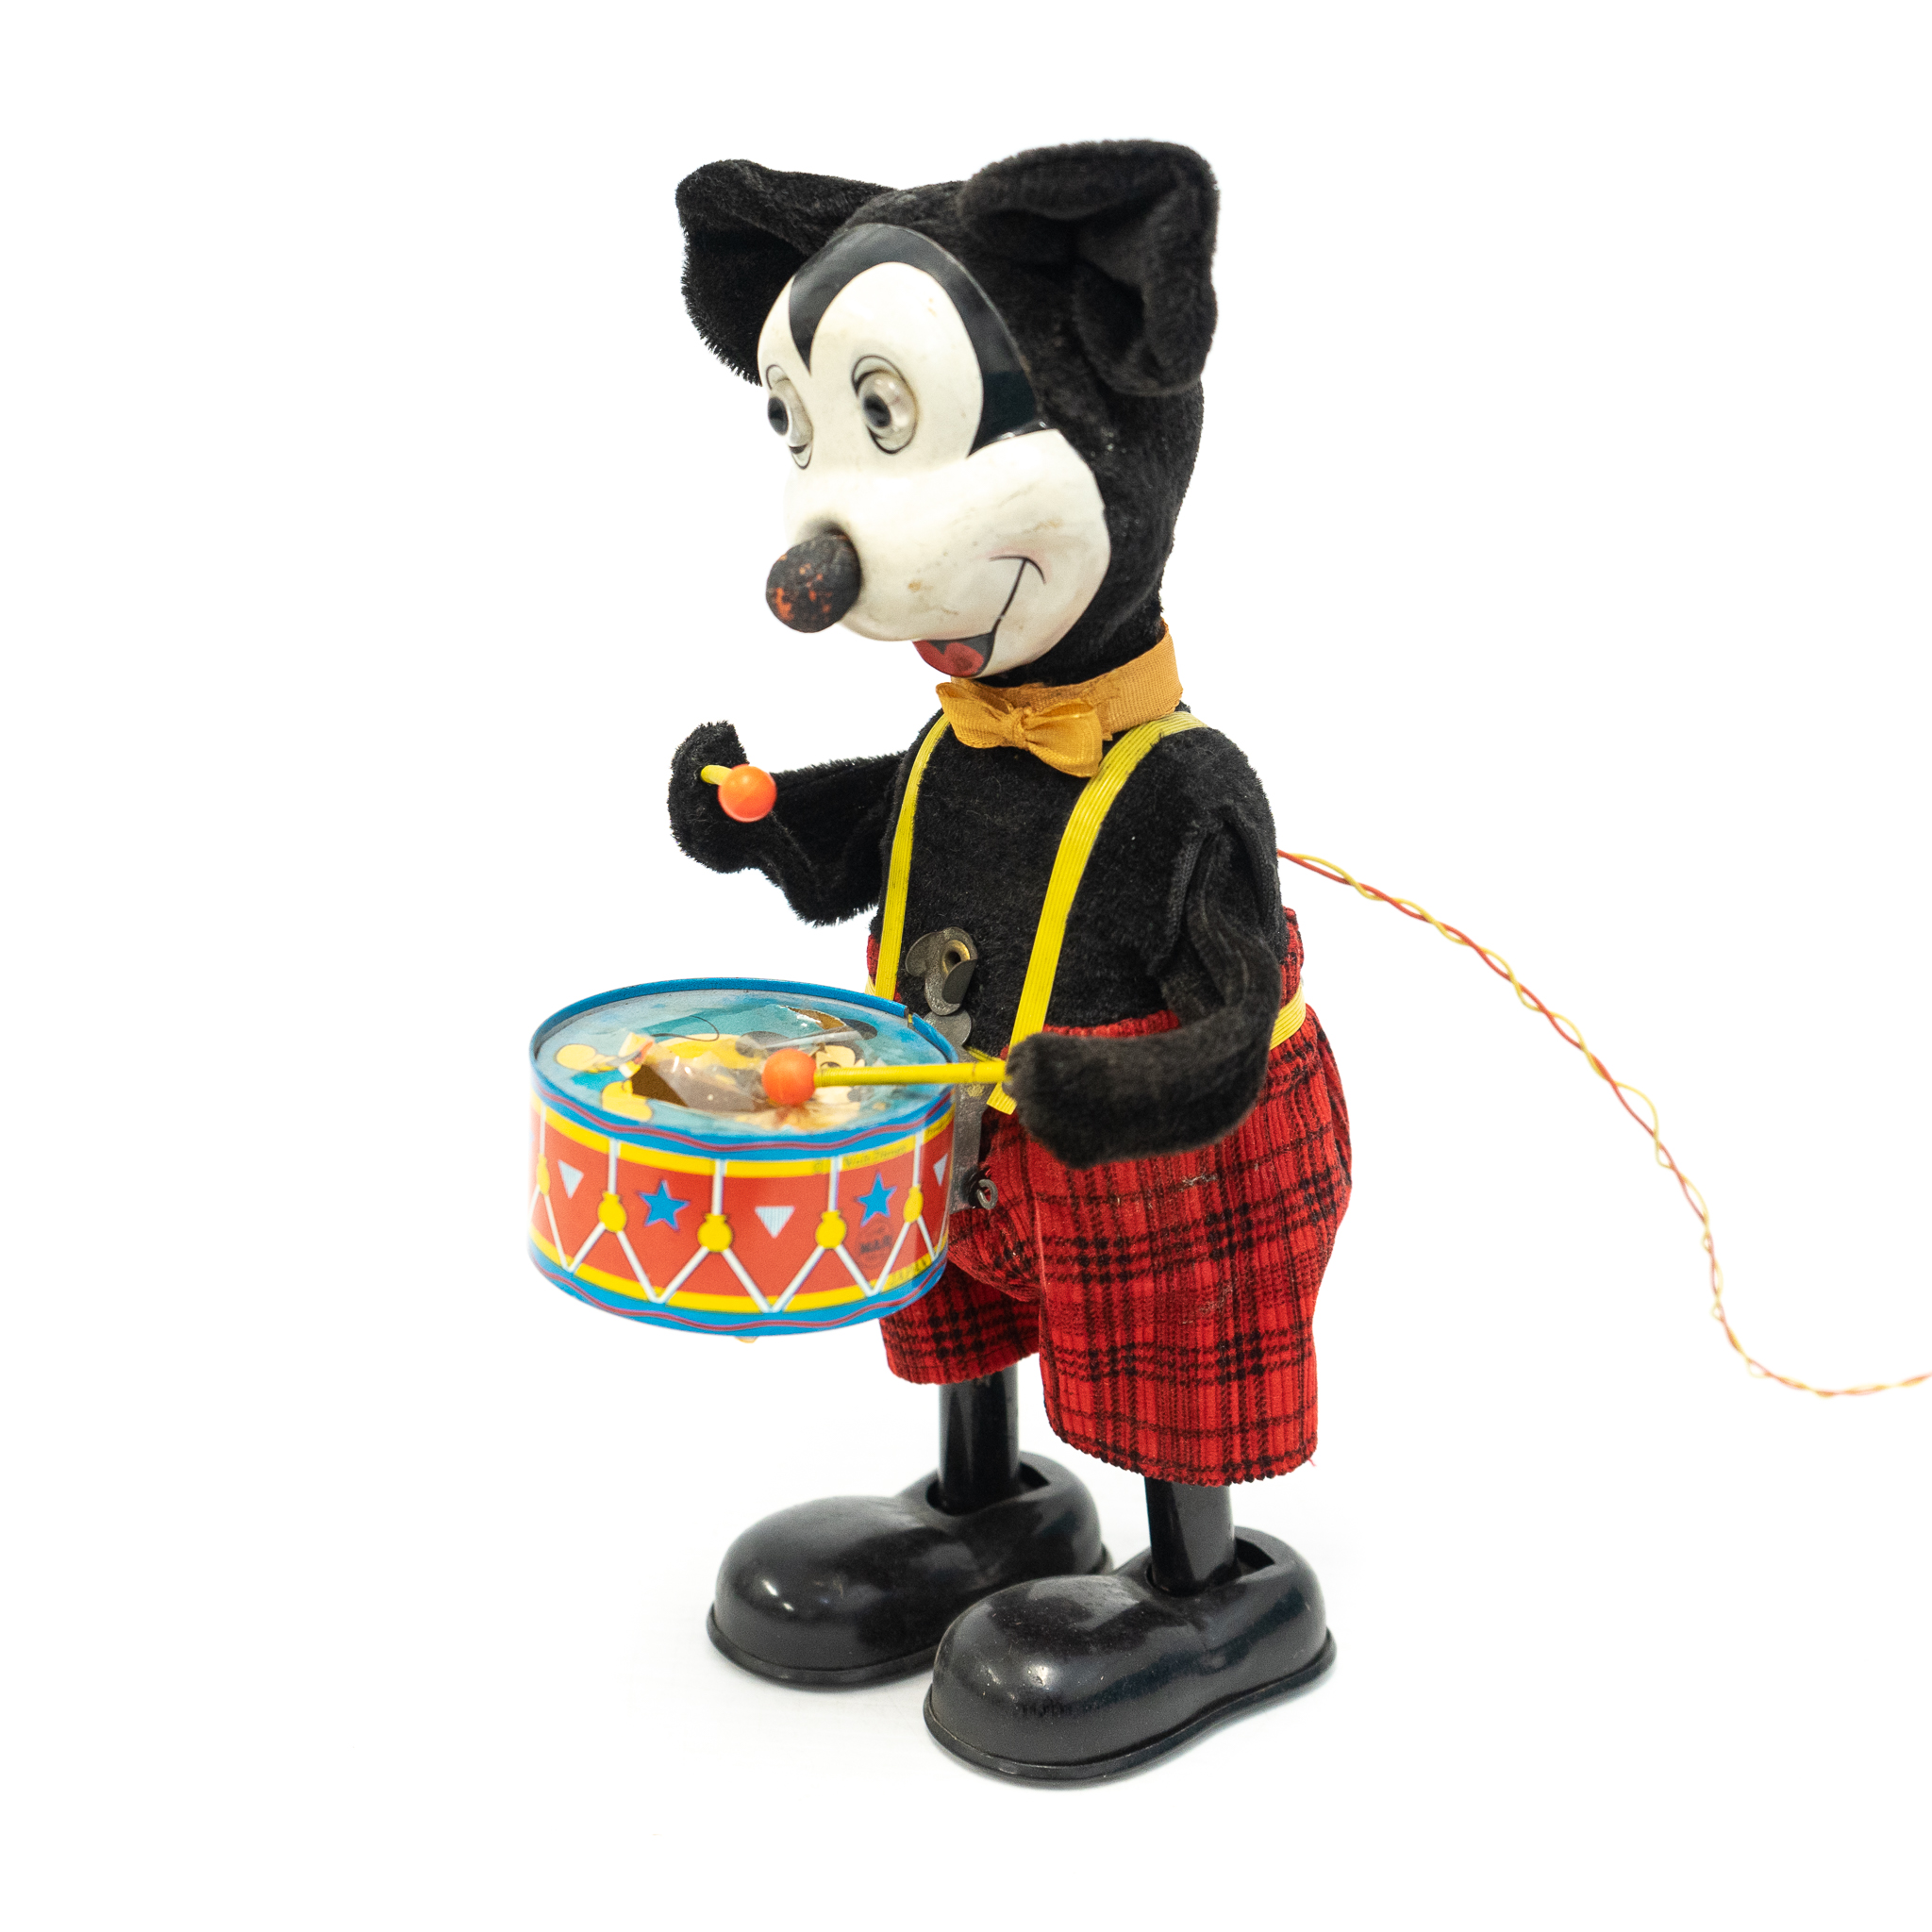 Linemar Mickey Mouse Battery Operated Drummer Toy | Harritt Group, Inc